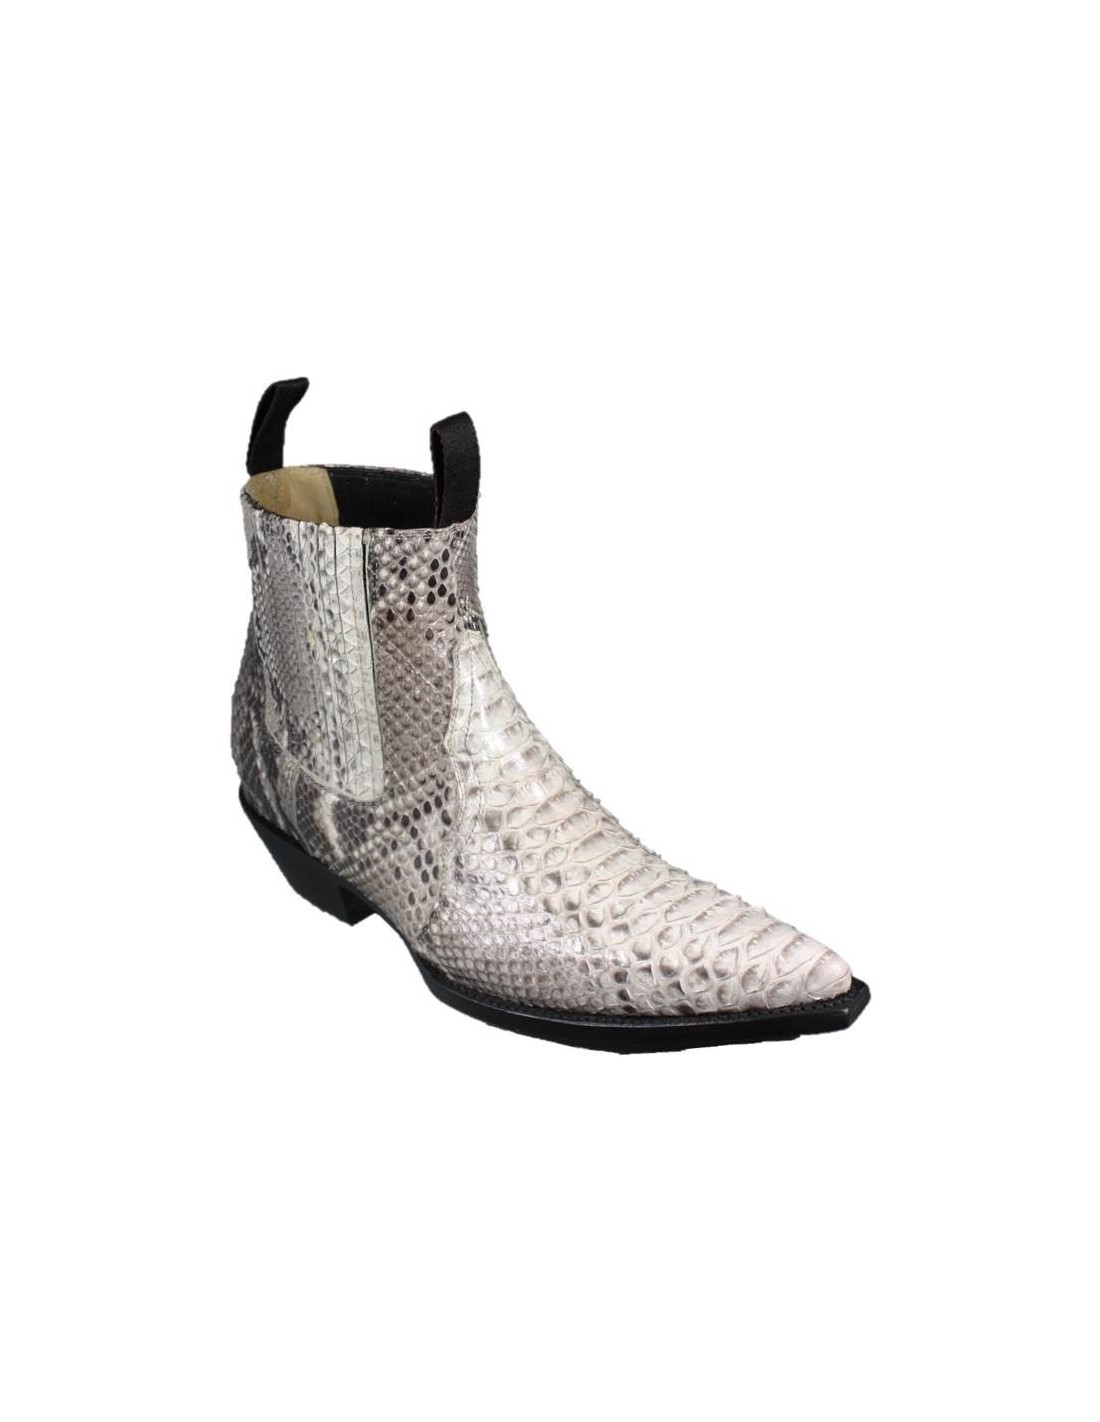 LUIS ANKLE ELASTIC BOOTS NATURAL GENUINEPYTHON SKIN - Go'west Boots